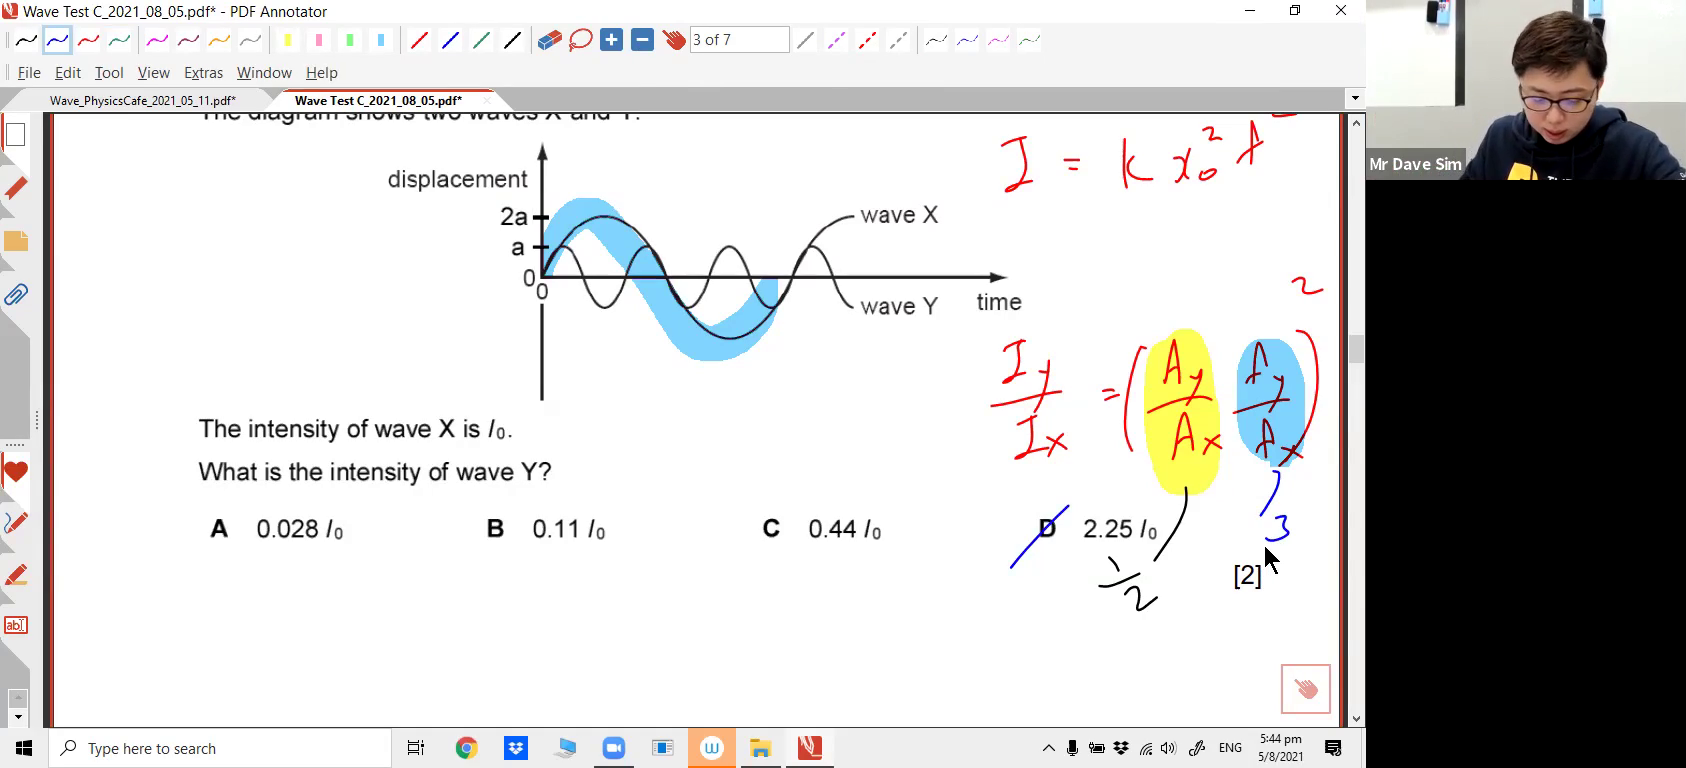 [WAVE MOTION] Intensity of Waves